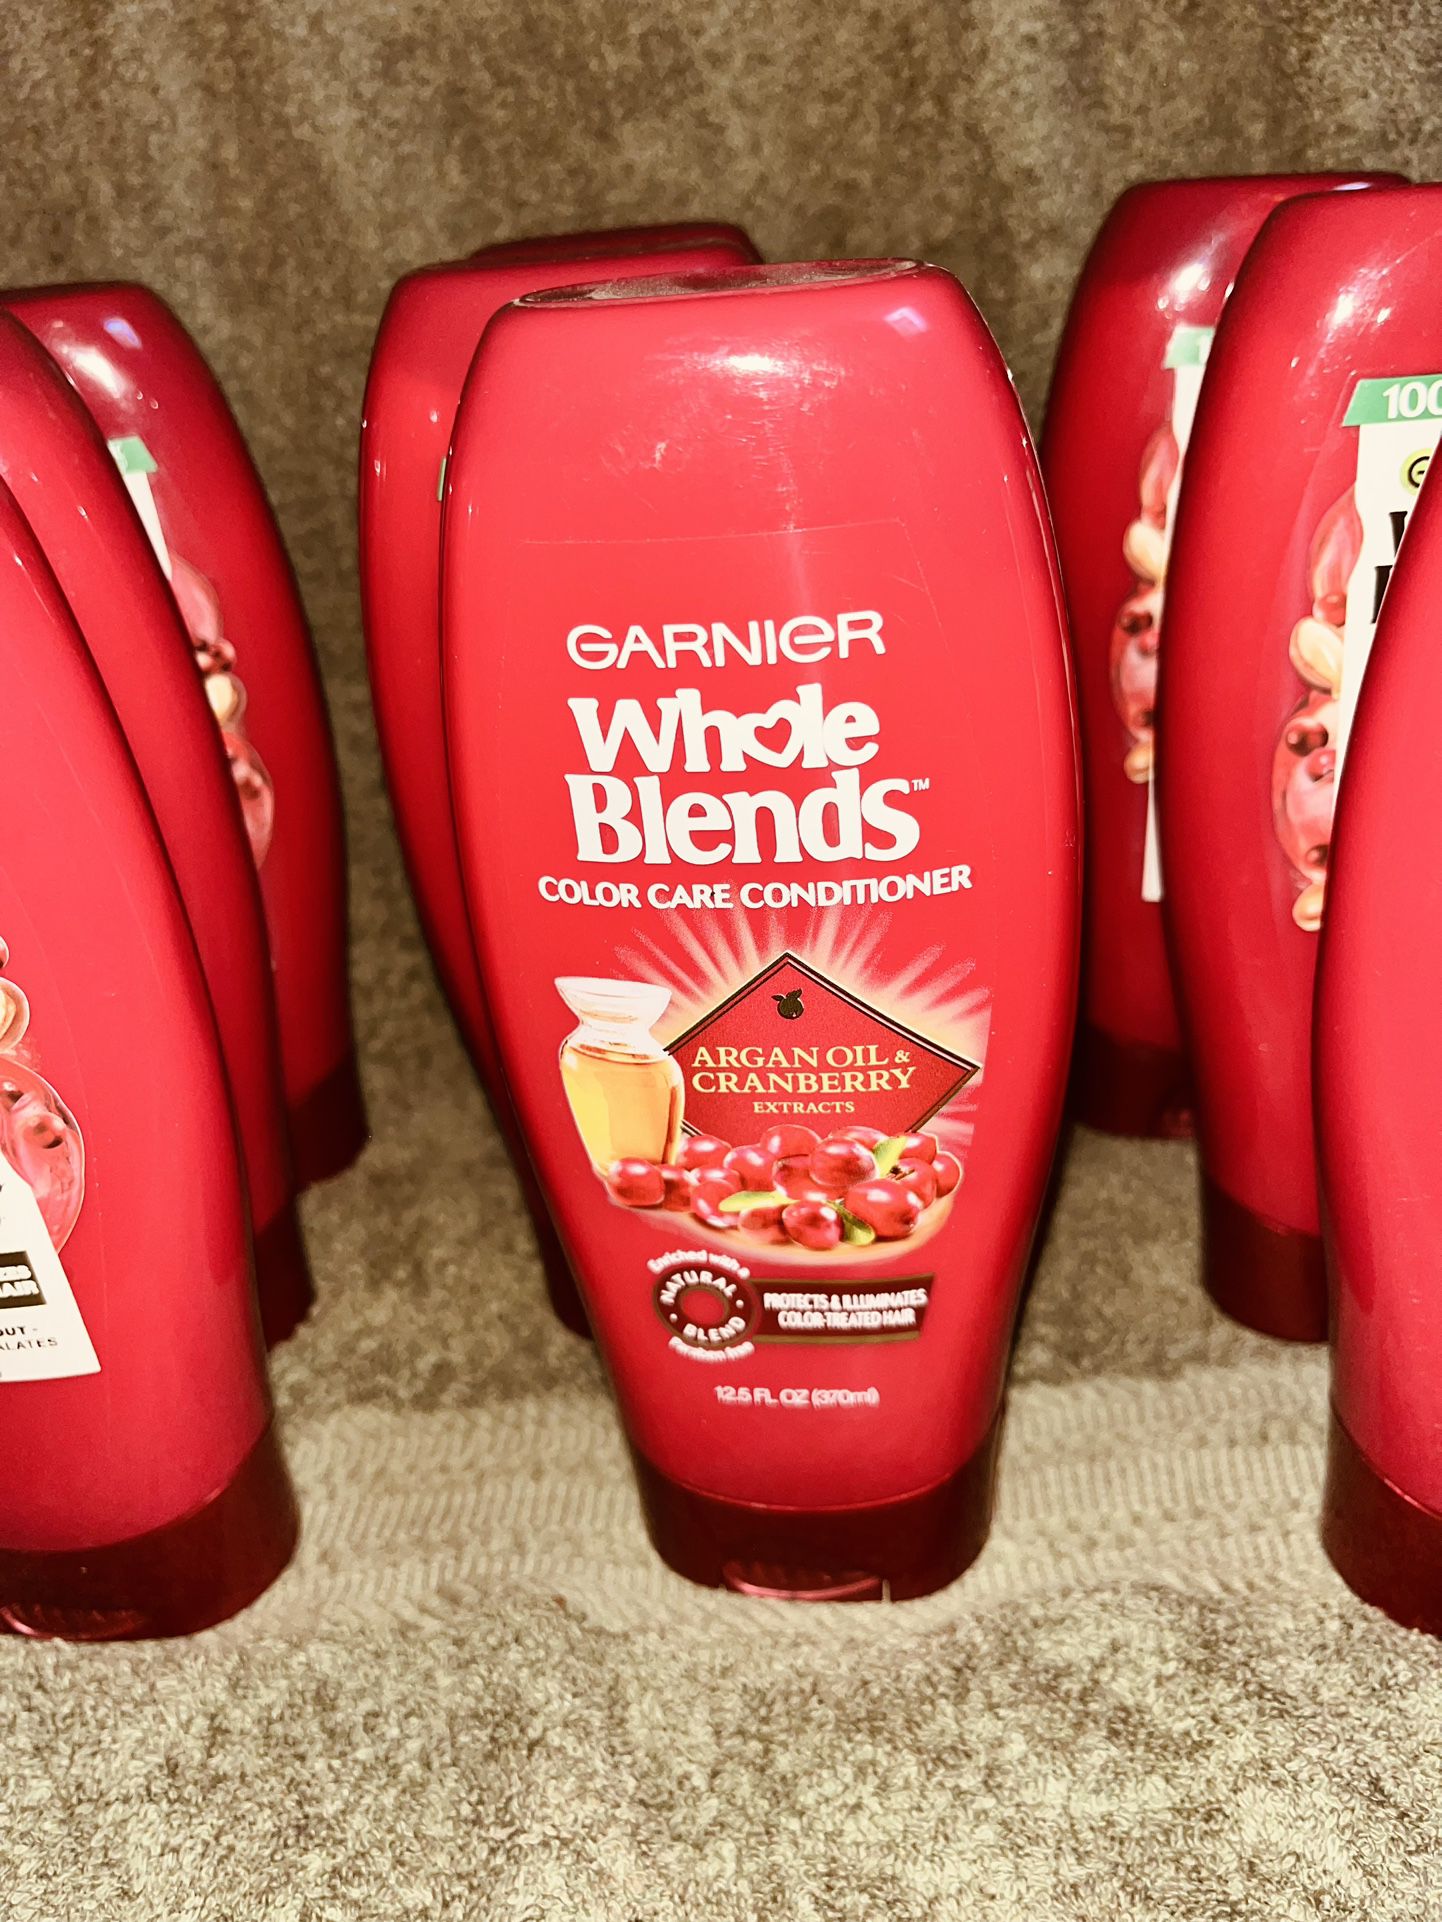 Whole Blends Argon Oil And Cranberry Conditioner 